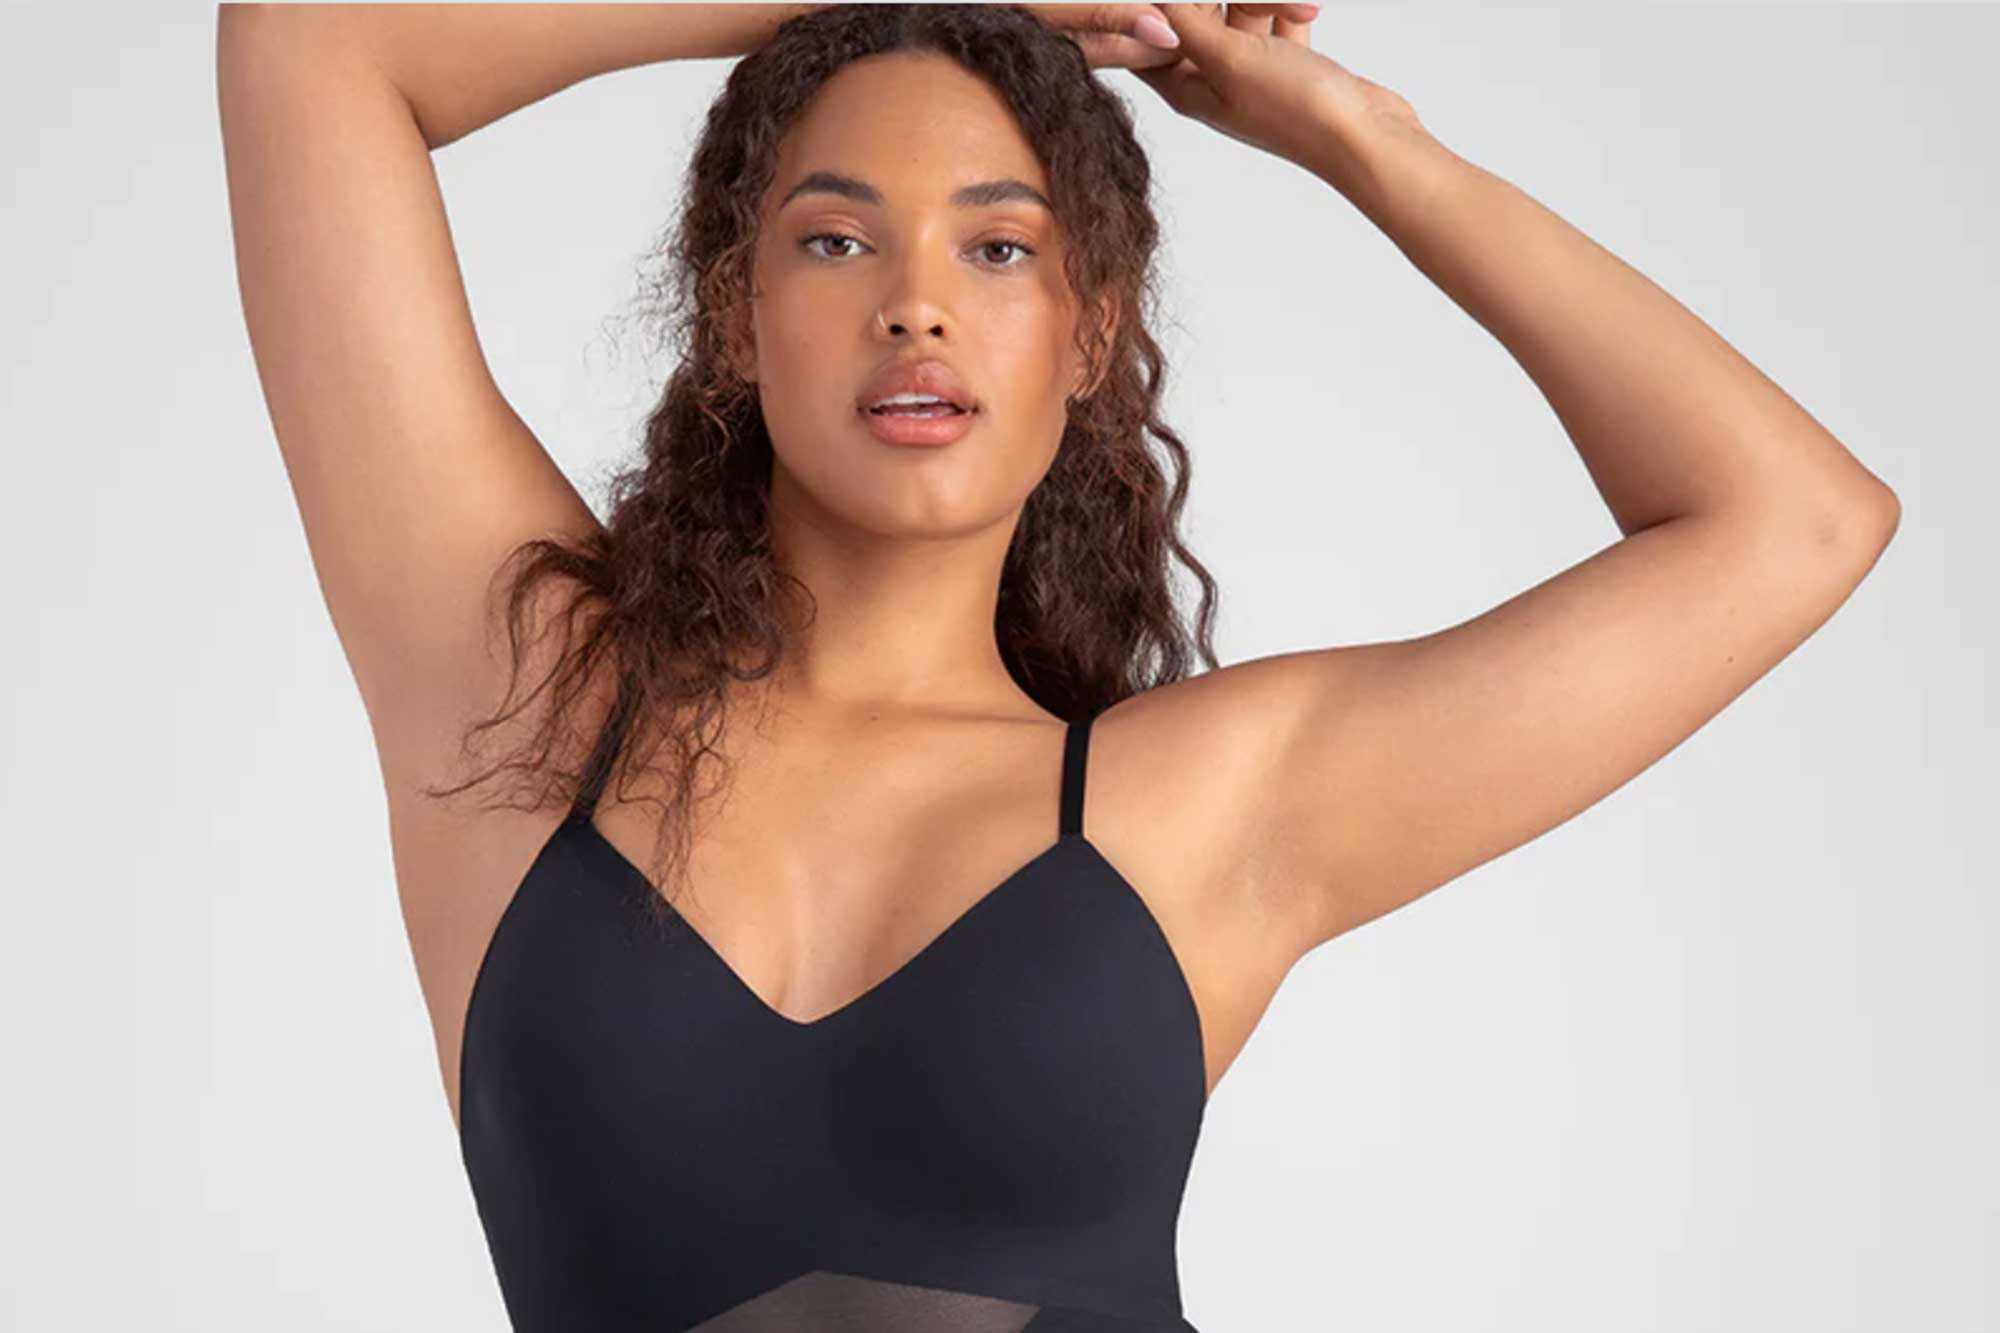 I Tried Honeylove's Crossover Bra. Here's What Happened